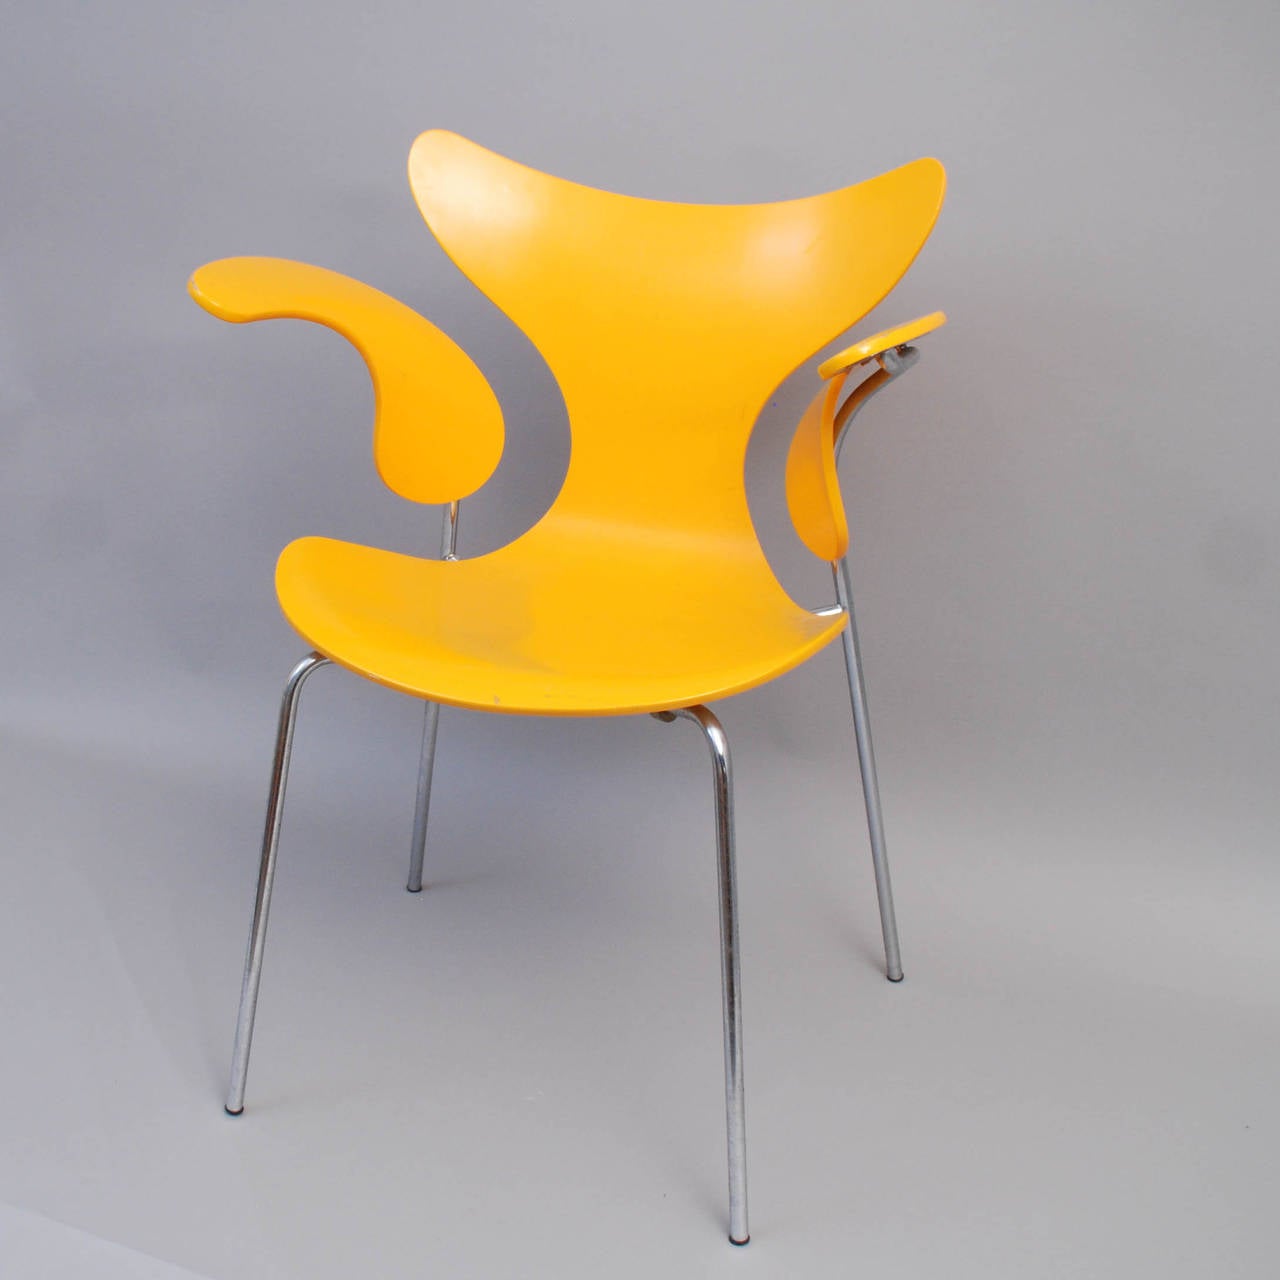 The 3208 chair, The Seagull is also known as The Lily. Designed by Arne Jacobsen for Fritz Hansen, Denmark in 1970. This chair, in sunny yellow, produced in 1976.